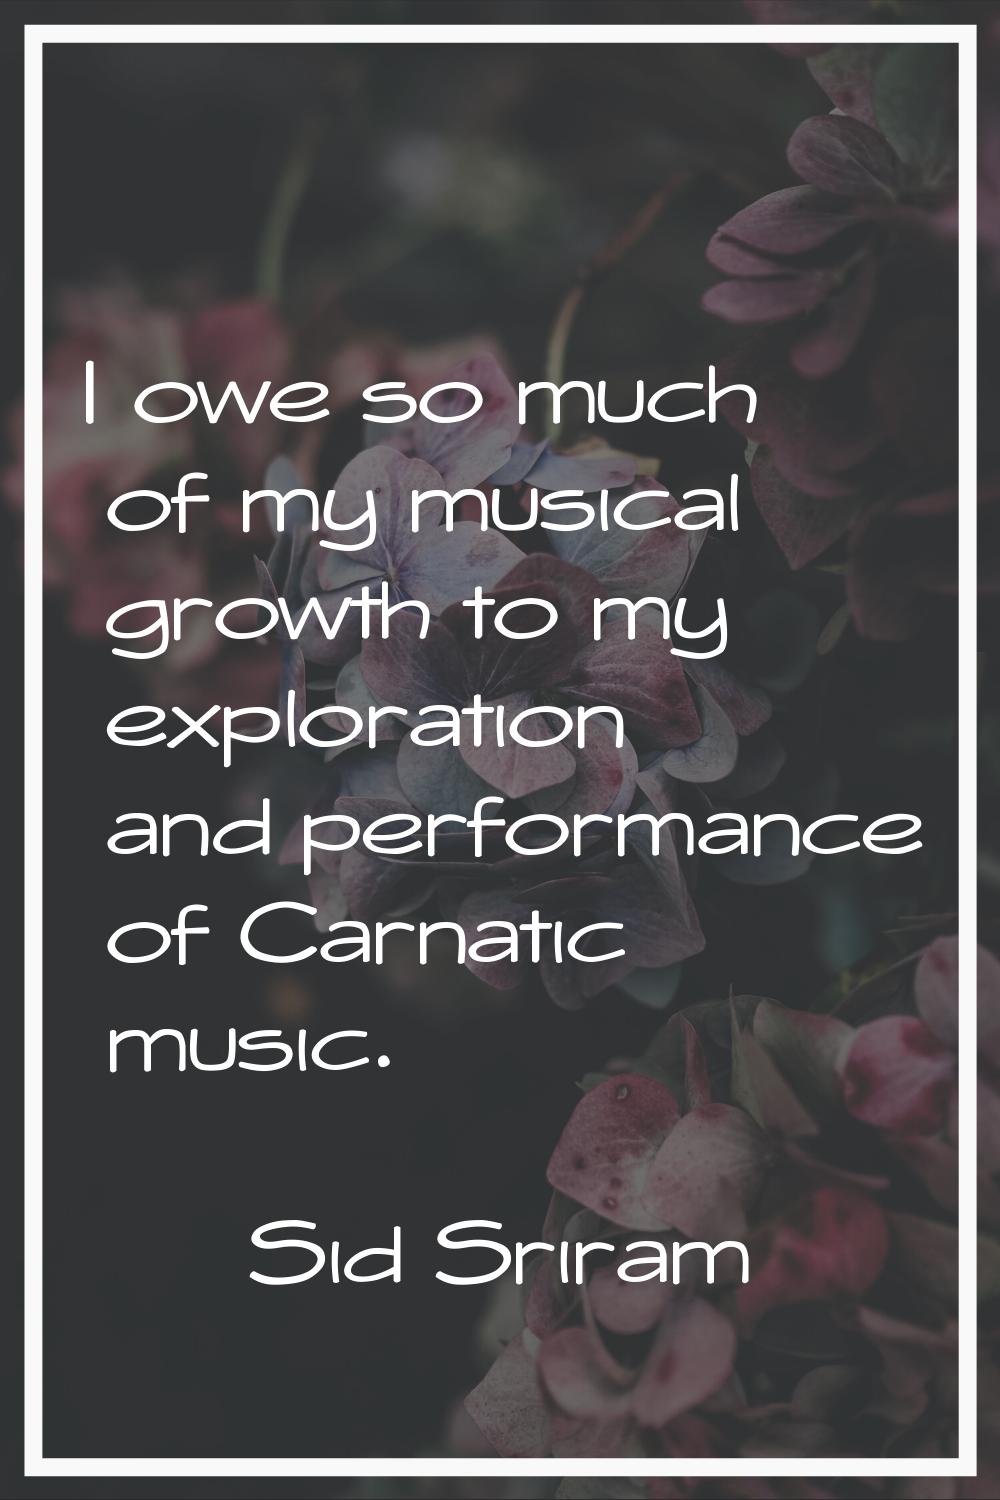 I owe so much of my musical growth to my exploration and performance of Carnatic music.